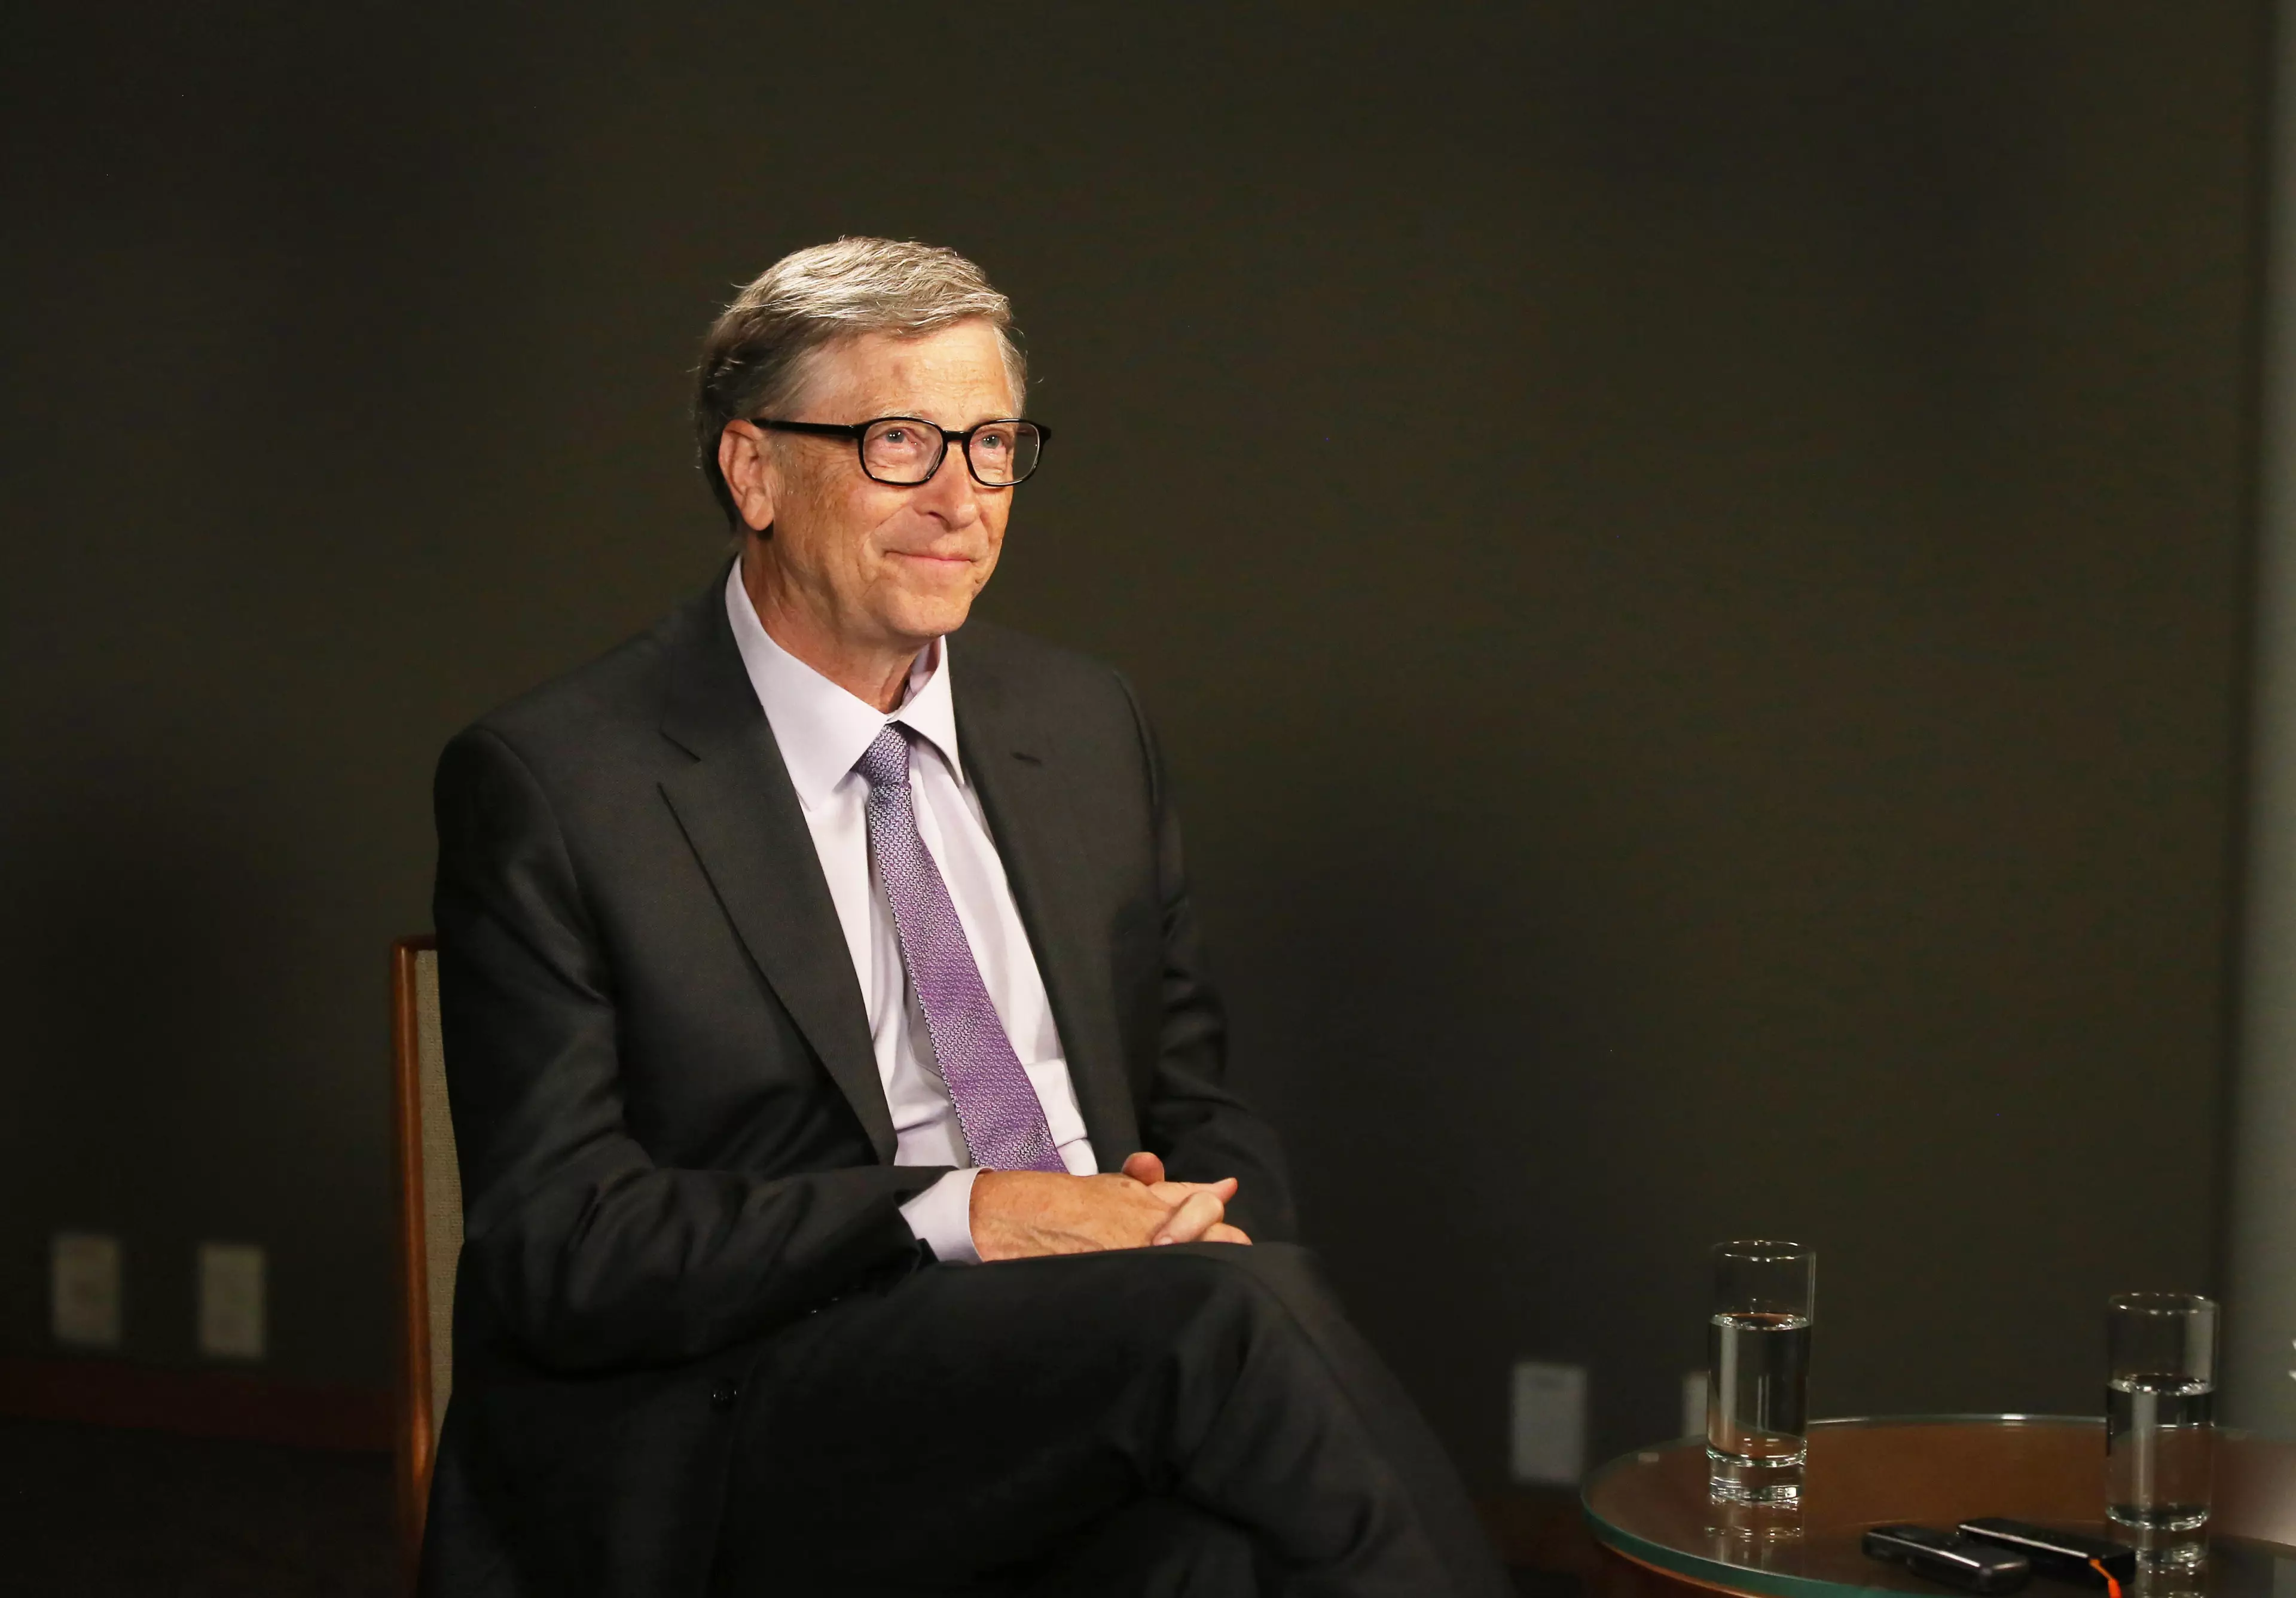 Bill Gates is a middle child and it's fair to say he's done alright for himself.